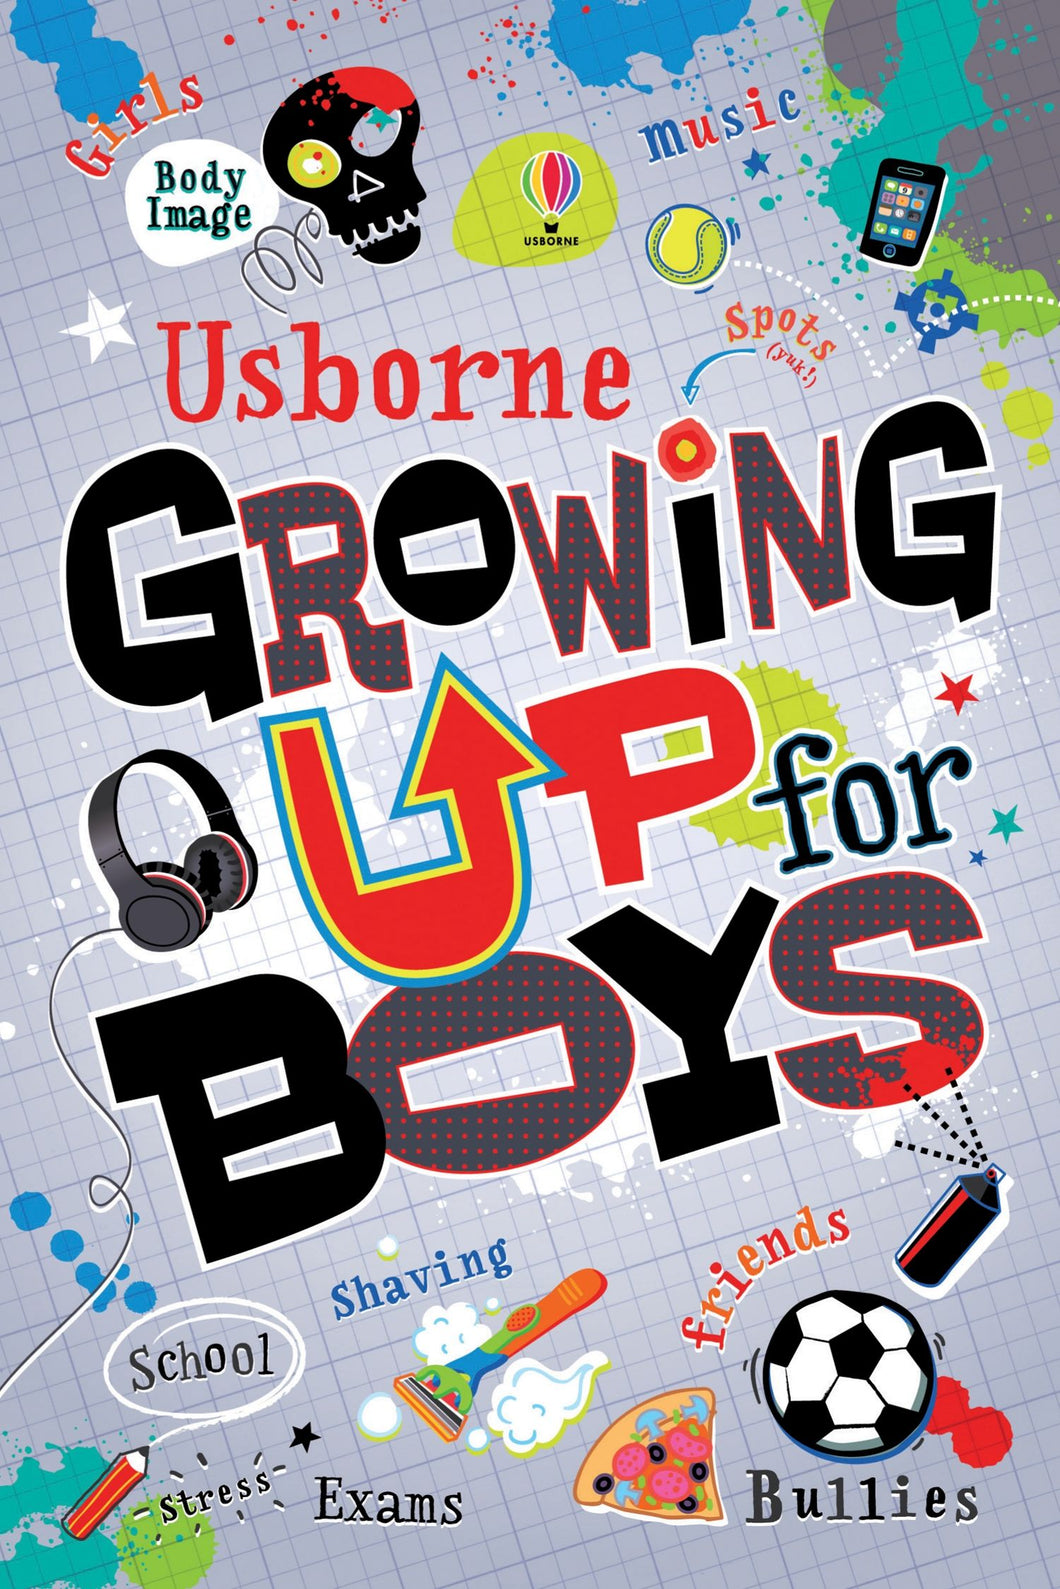 Growing Up for Boys